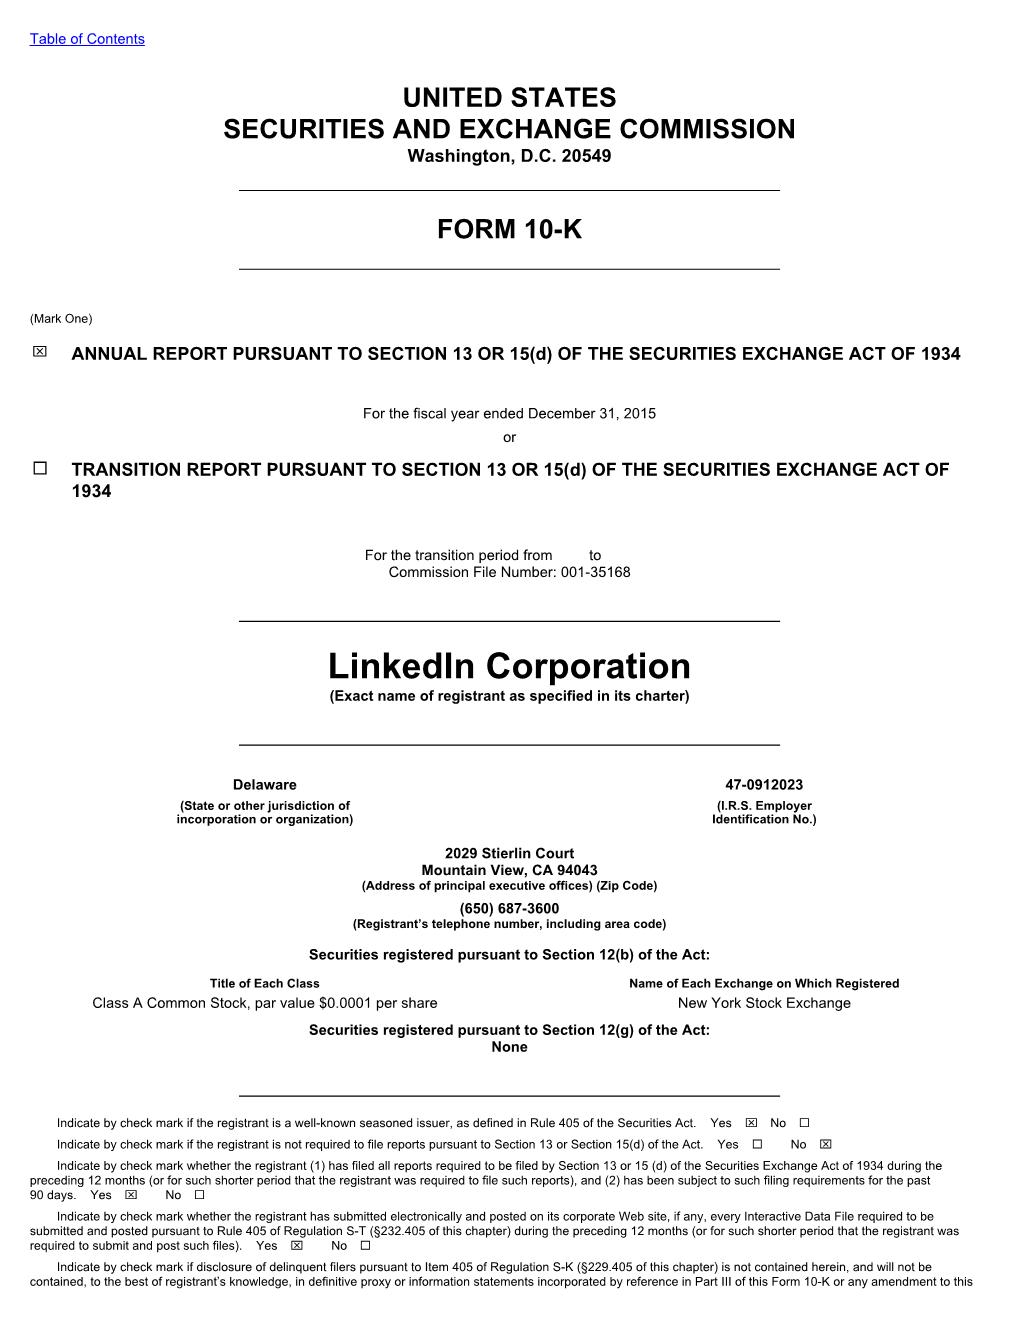 Linkedin Corporation (Exact Name of Registrant As Specified in Its Charter)